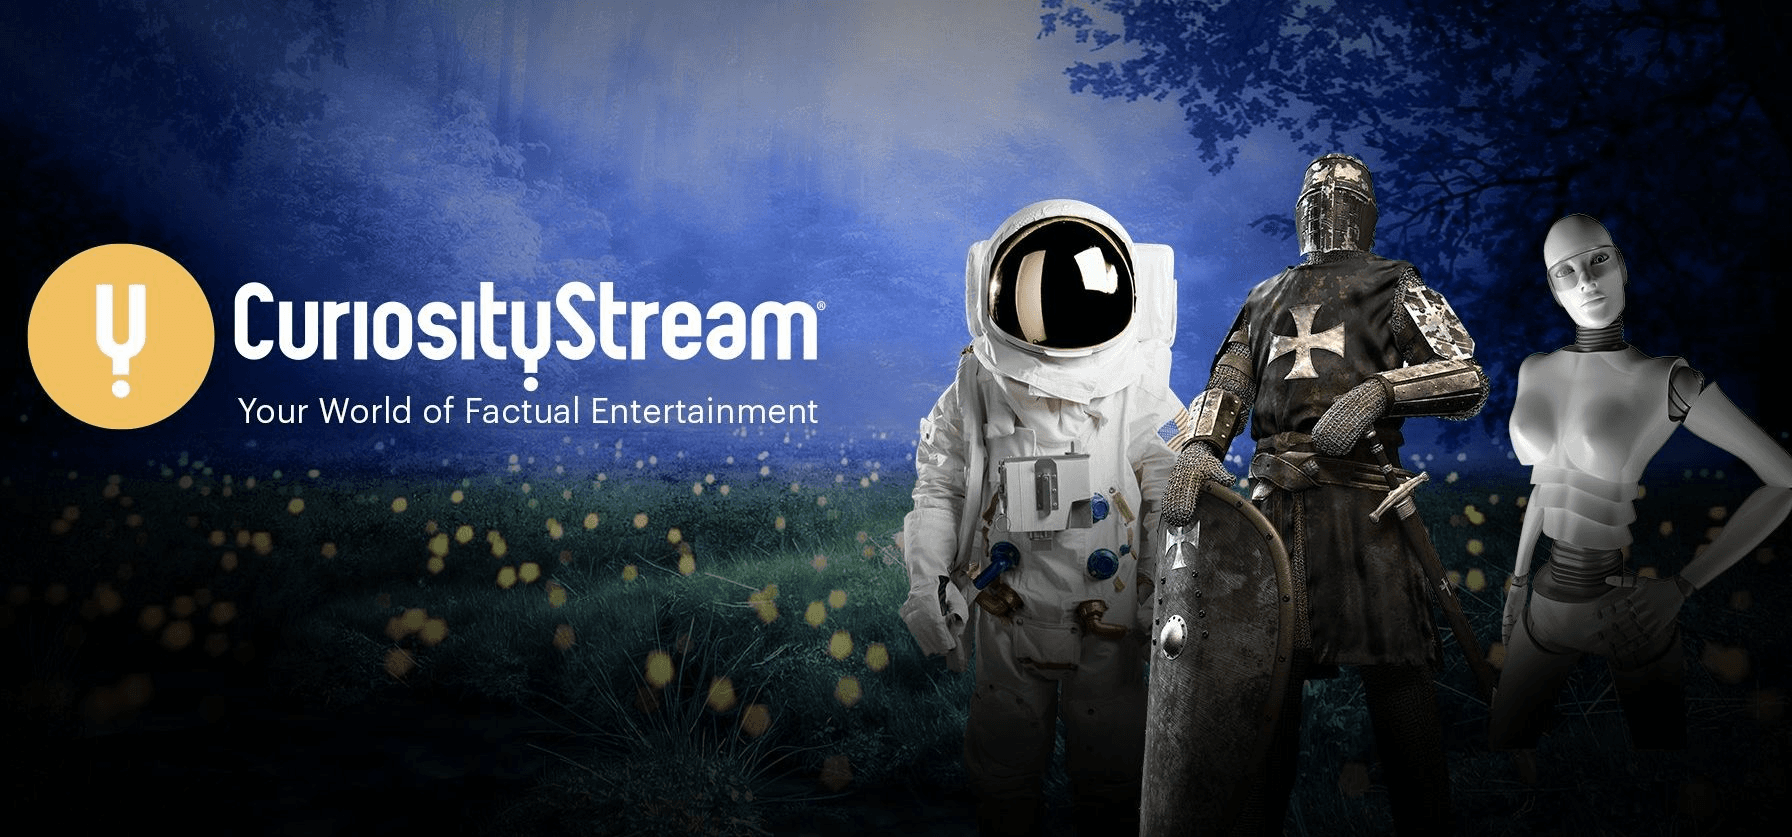 Read our CuriosityStream review to see if your find CuriosityStream worth signing up for. 